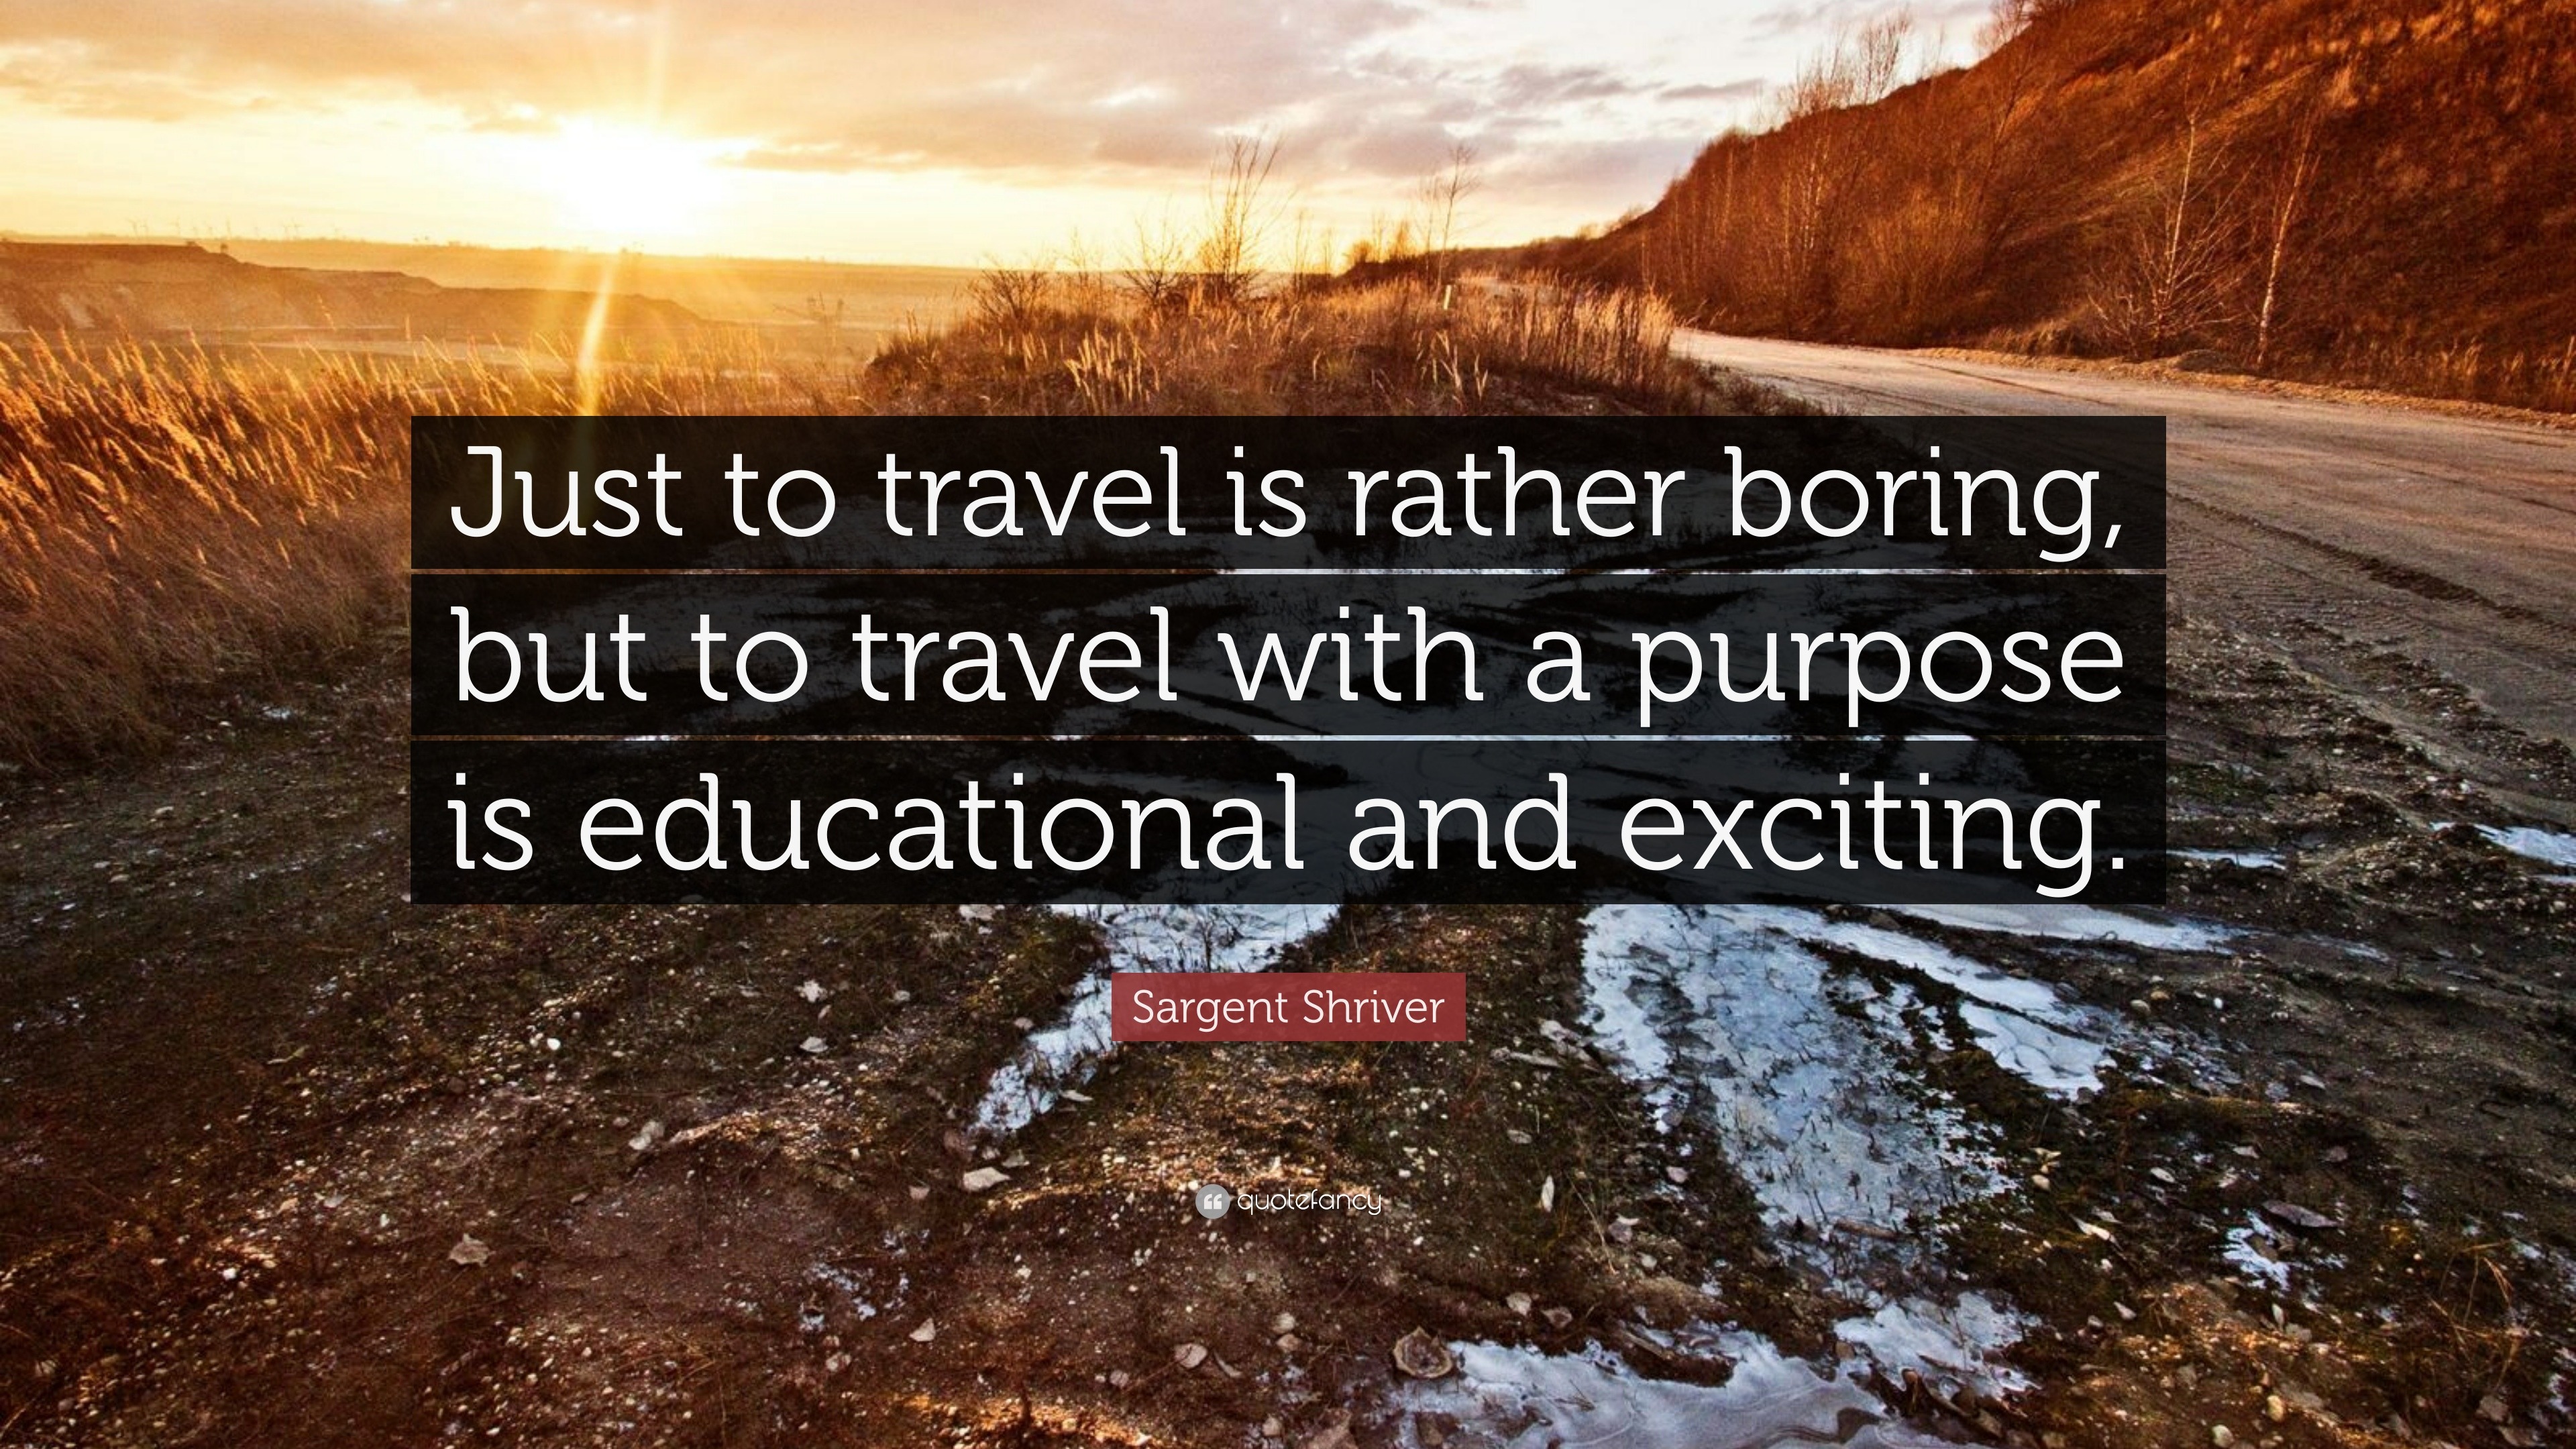 Sargent Shriver Quote: “Just to travel is rather boring, but to travel